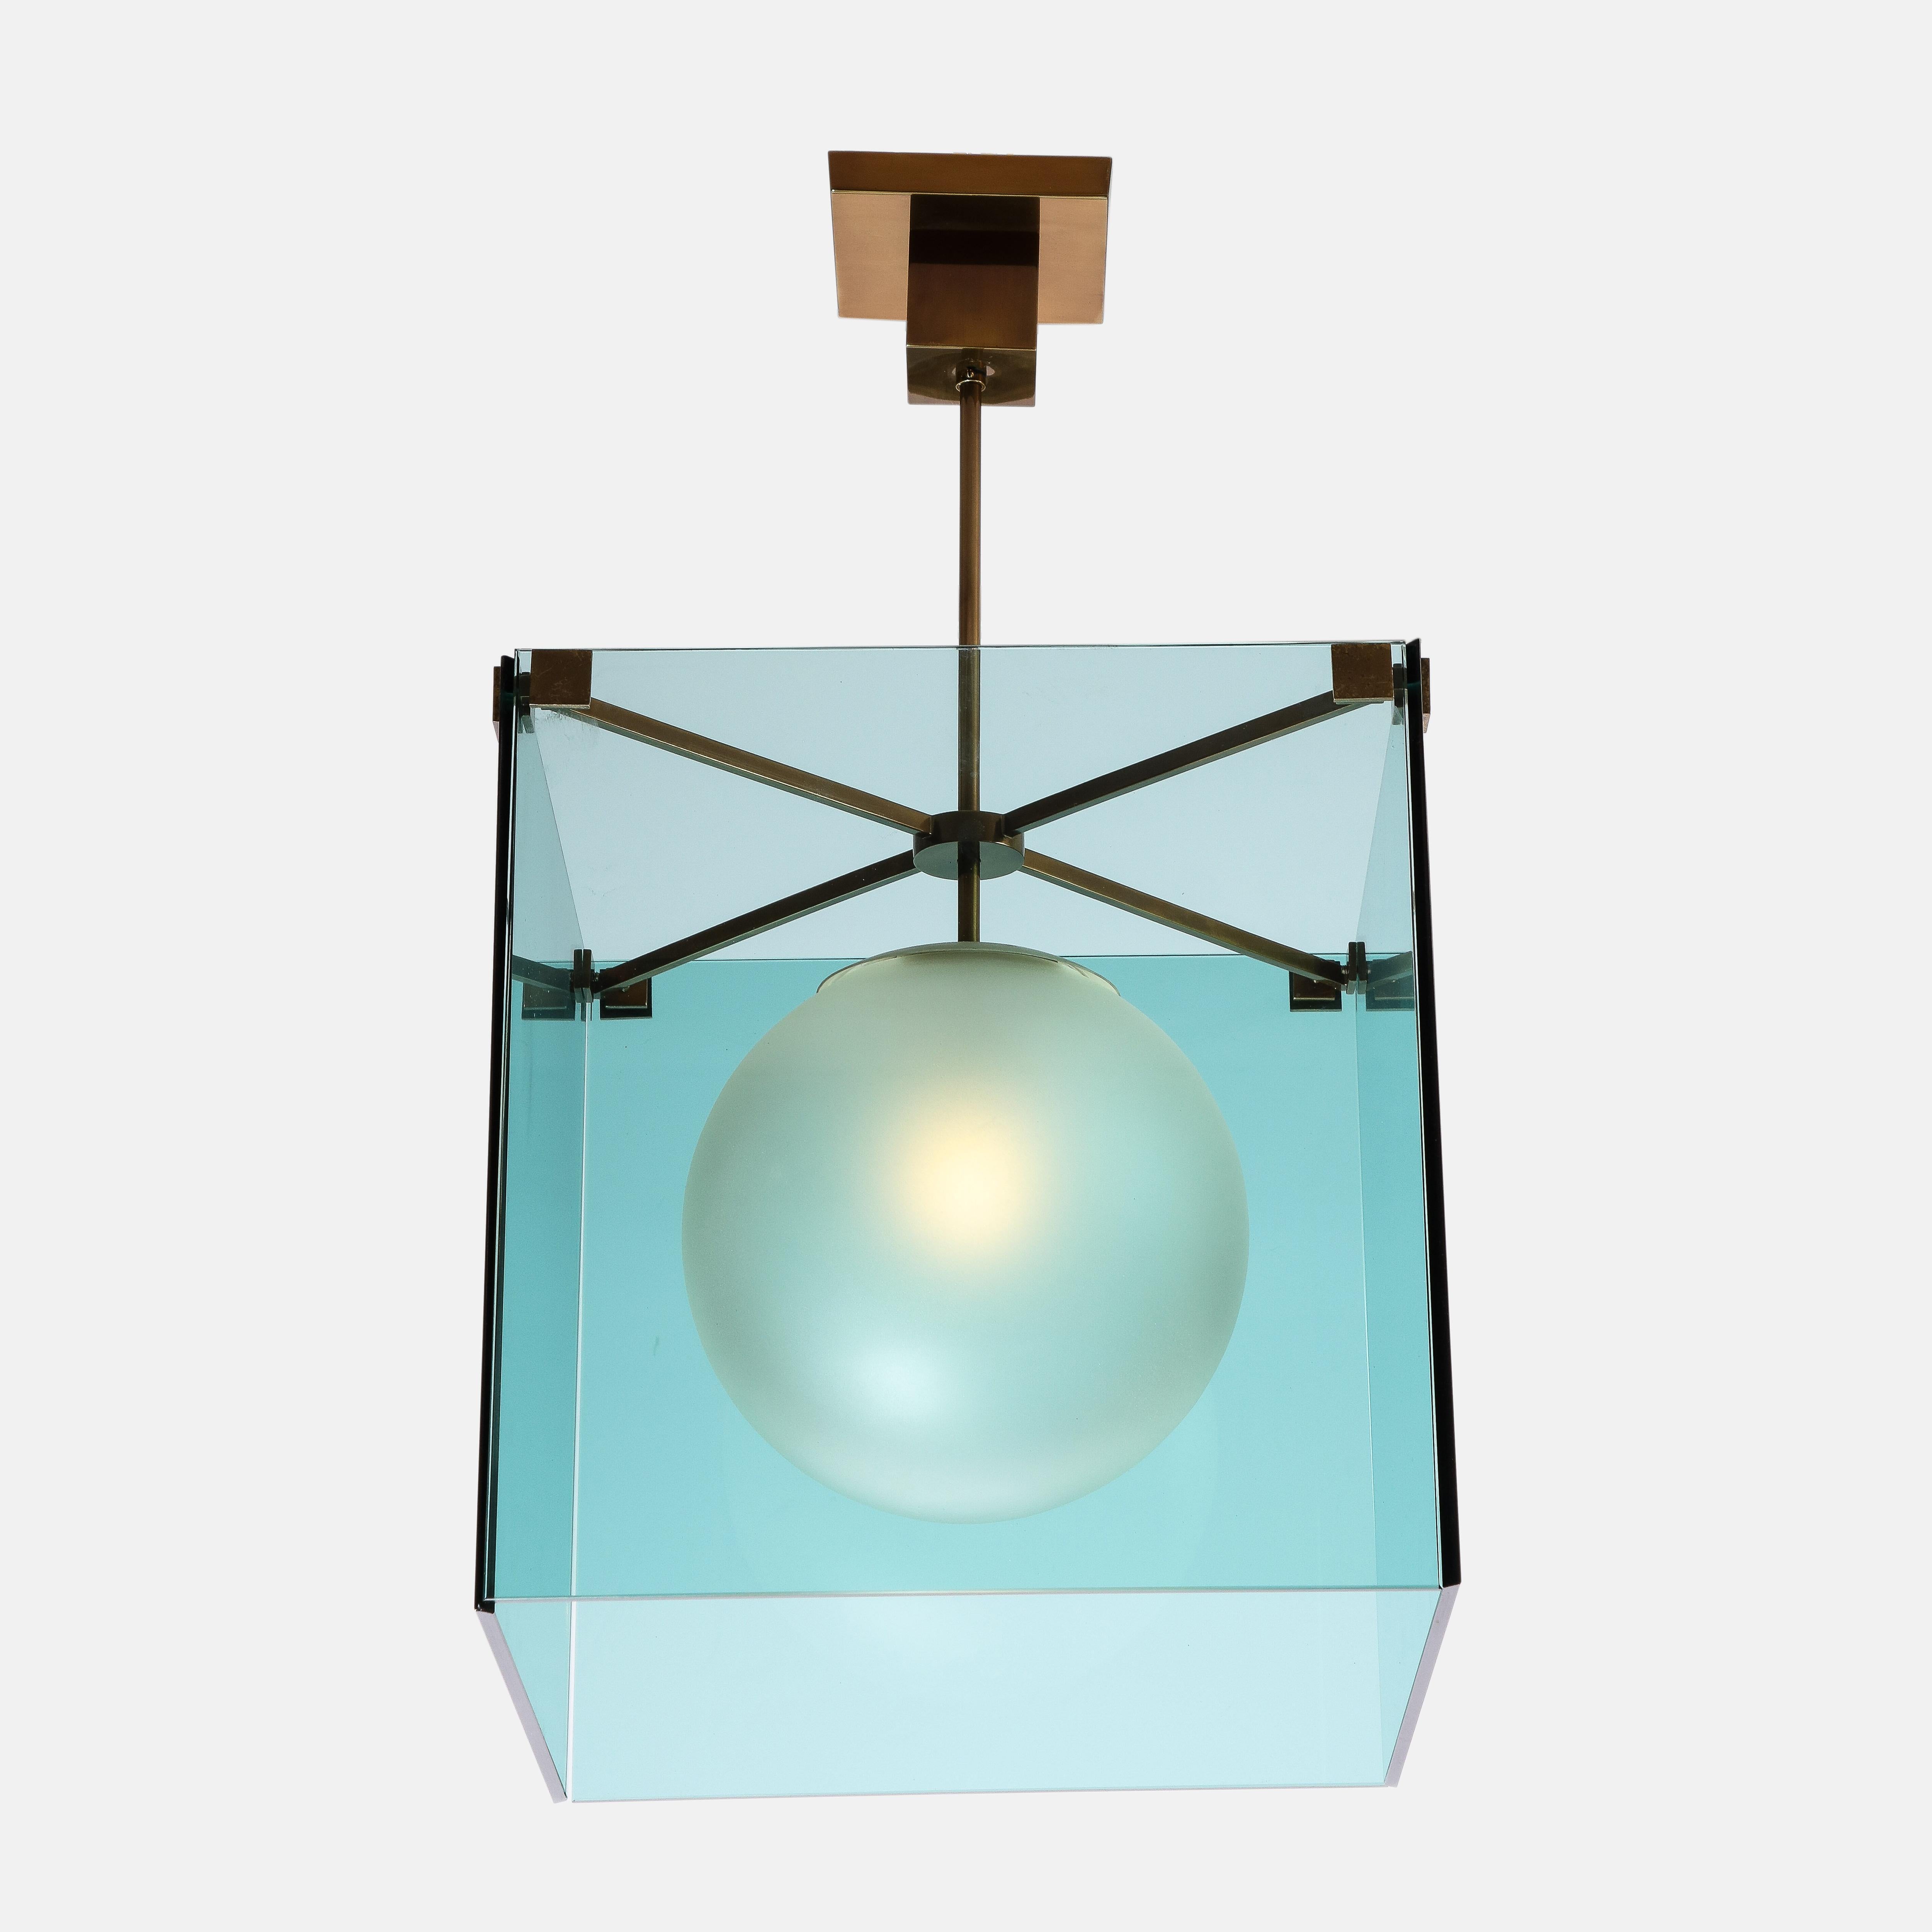 Max Ingrand for Fontana Arte rare chandelier model 2073 consisting of a satin or acid-etched glass globe diffuser inside four thick square plates of colored glass suspended on a brass structure with brass square mounts, and hung from original square